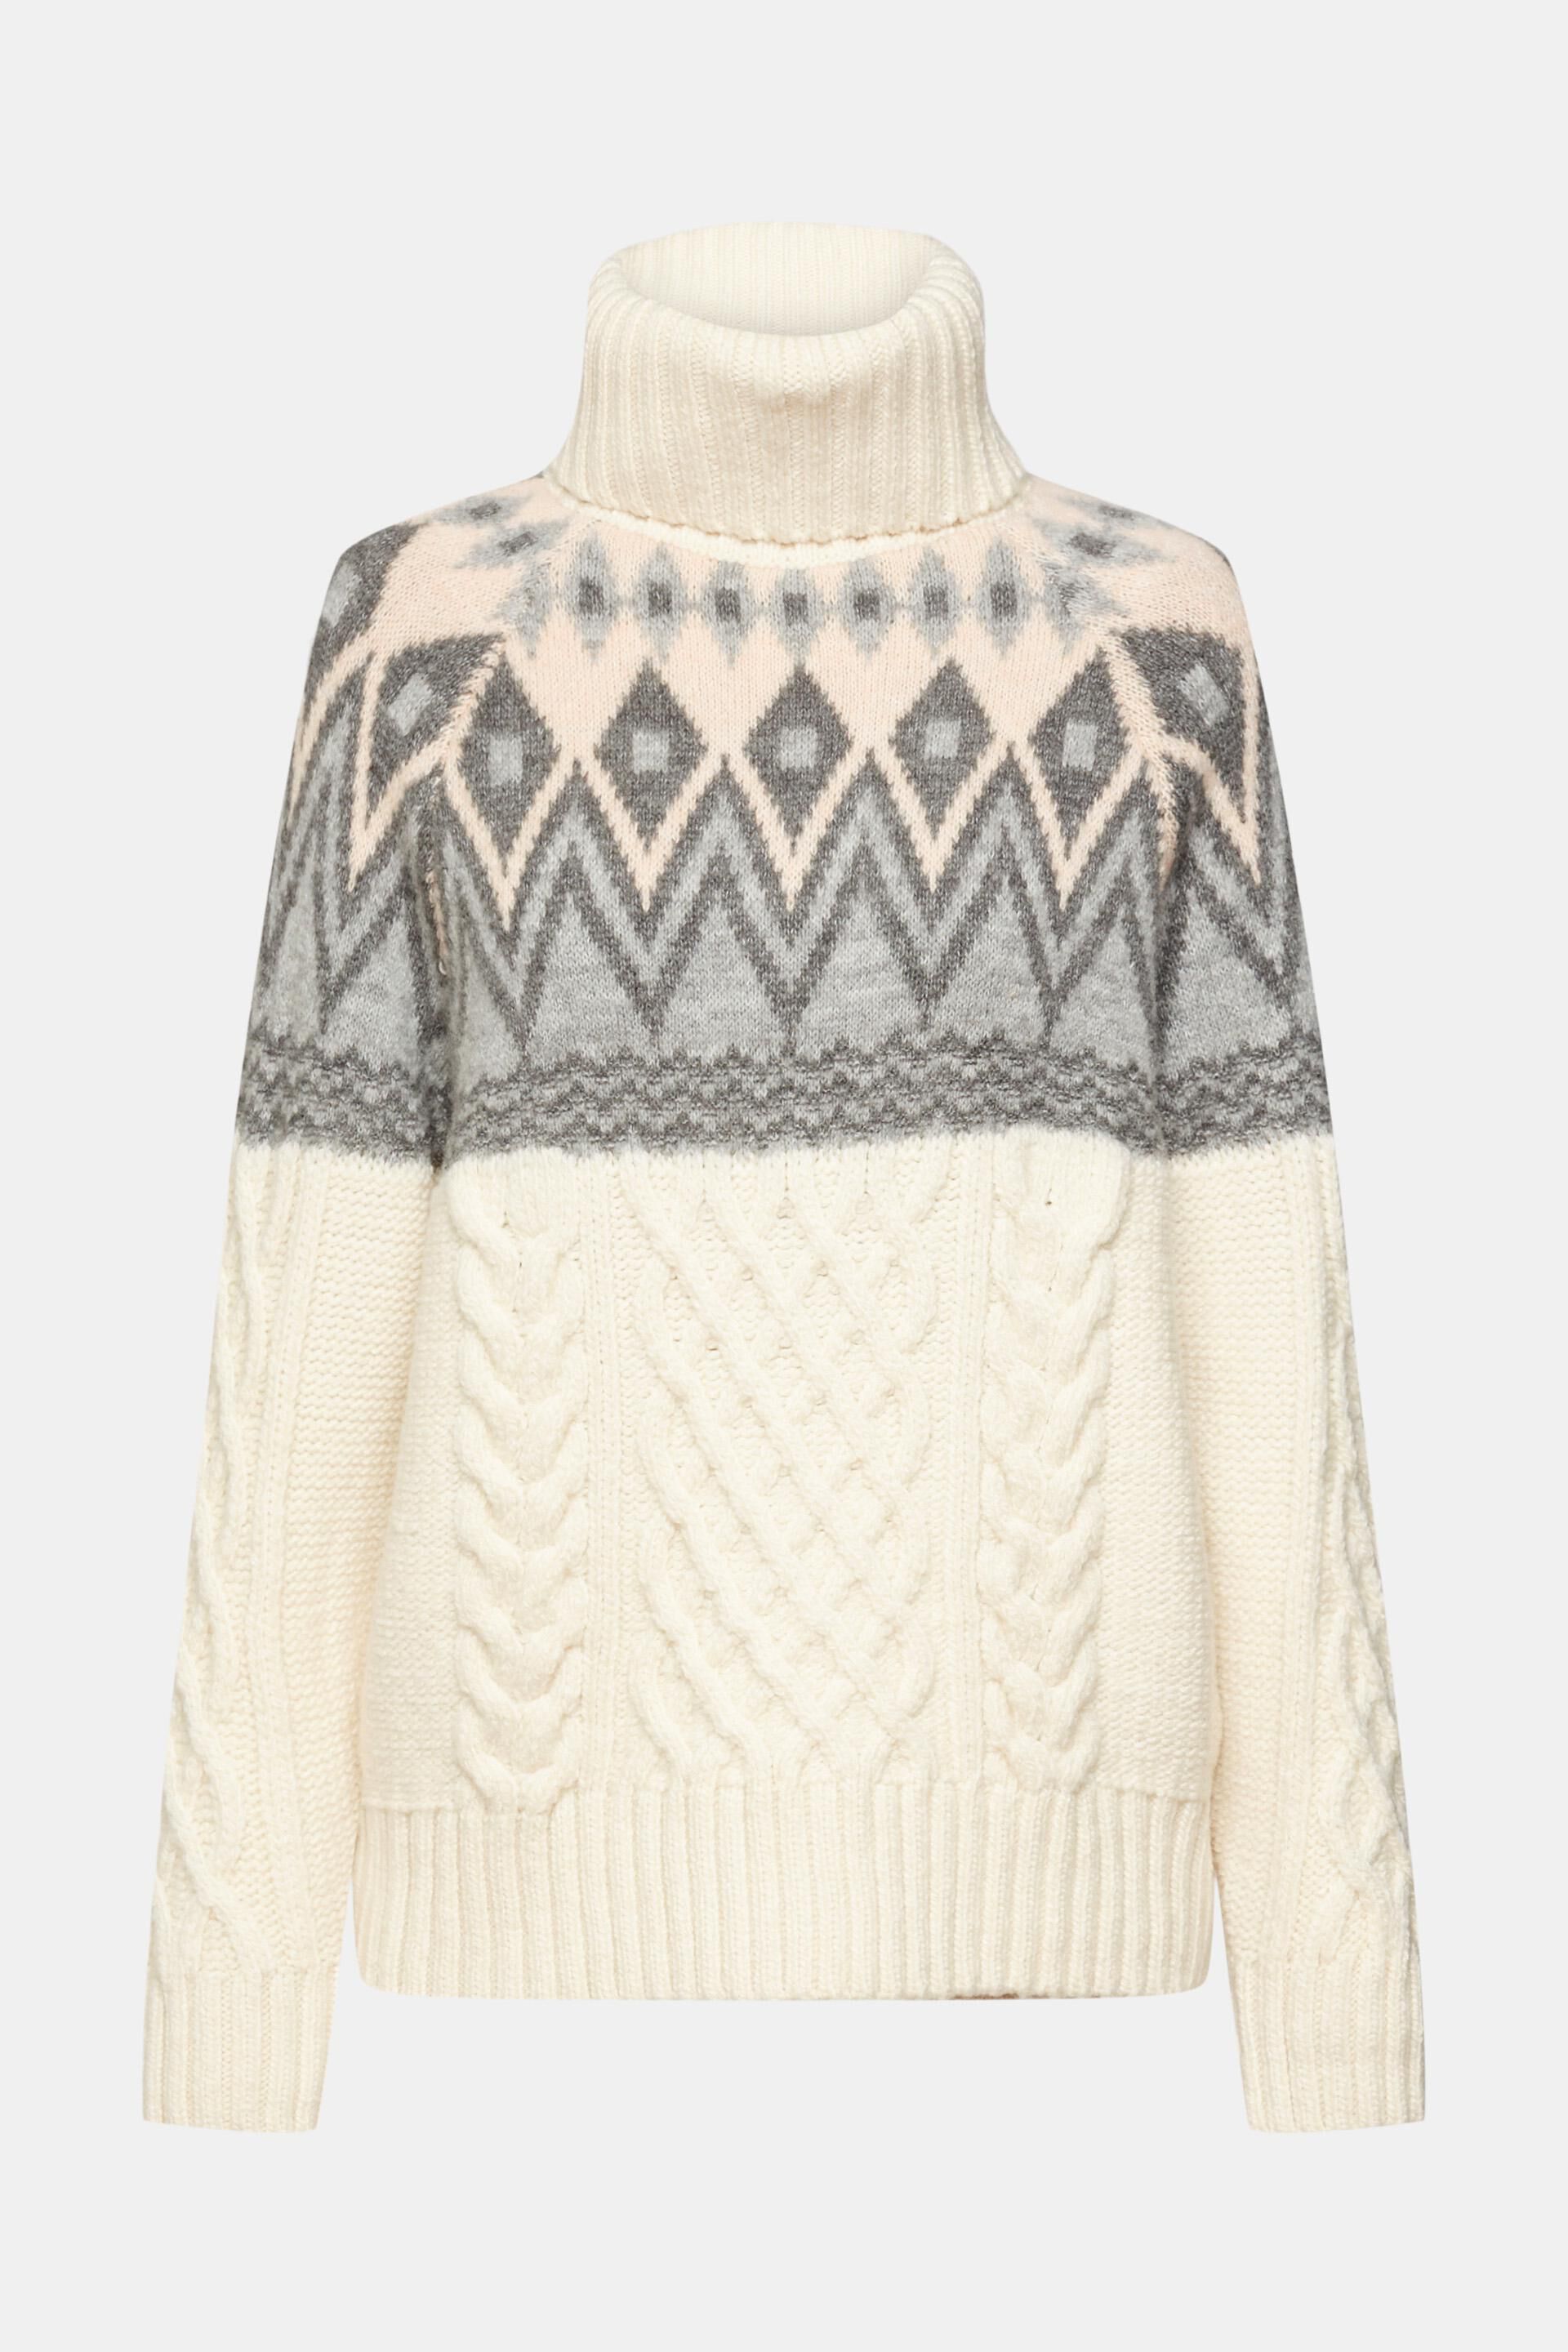 Shop the Latest in Women's Fashion Jacquard knit roll neck jumper